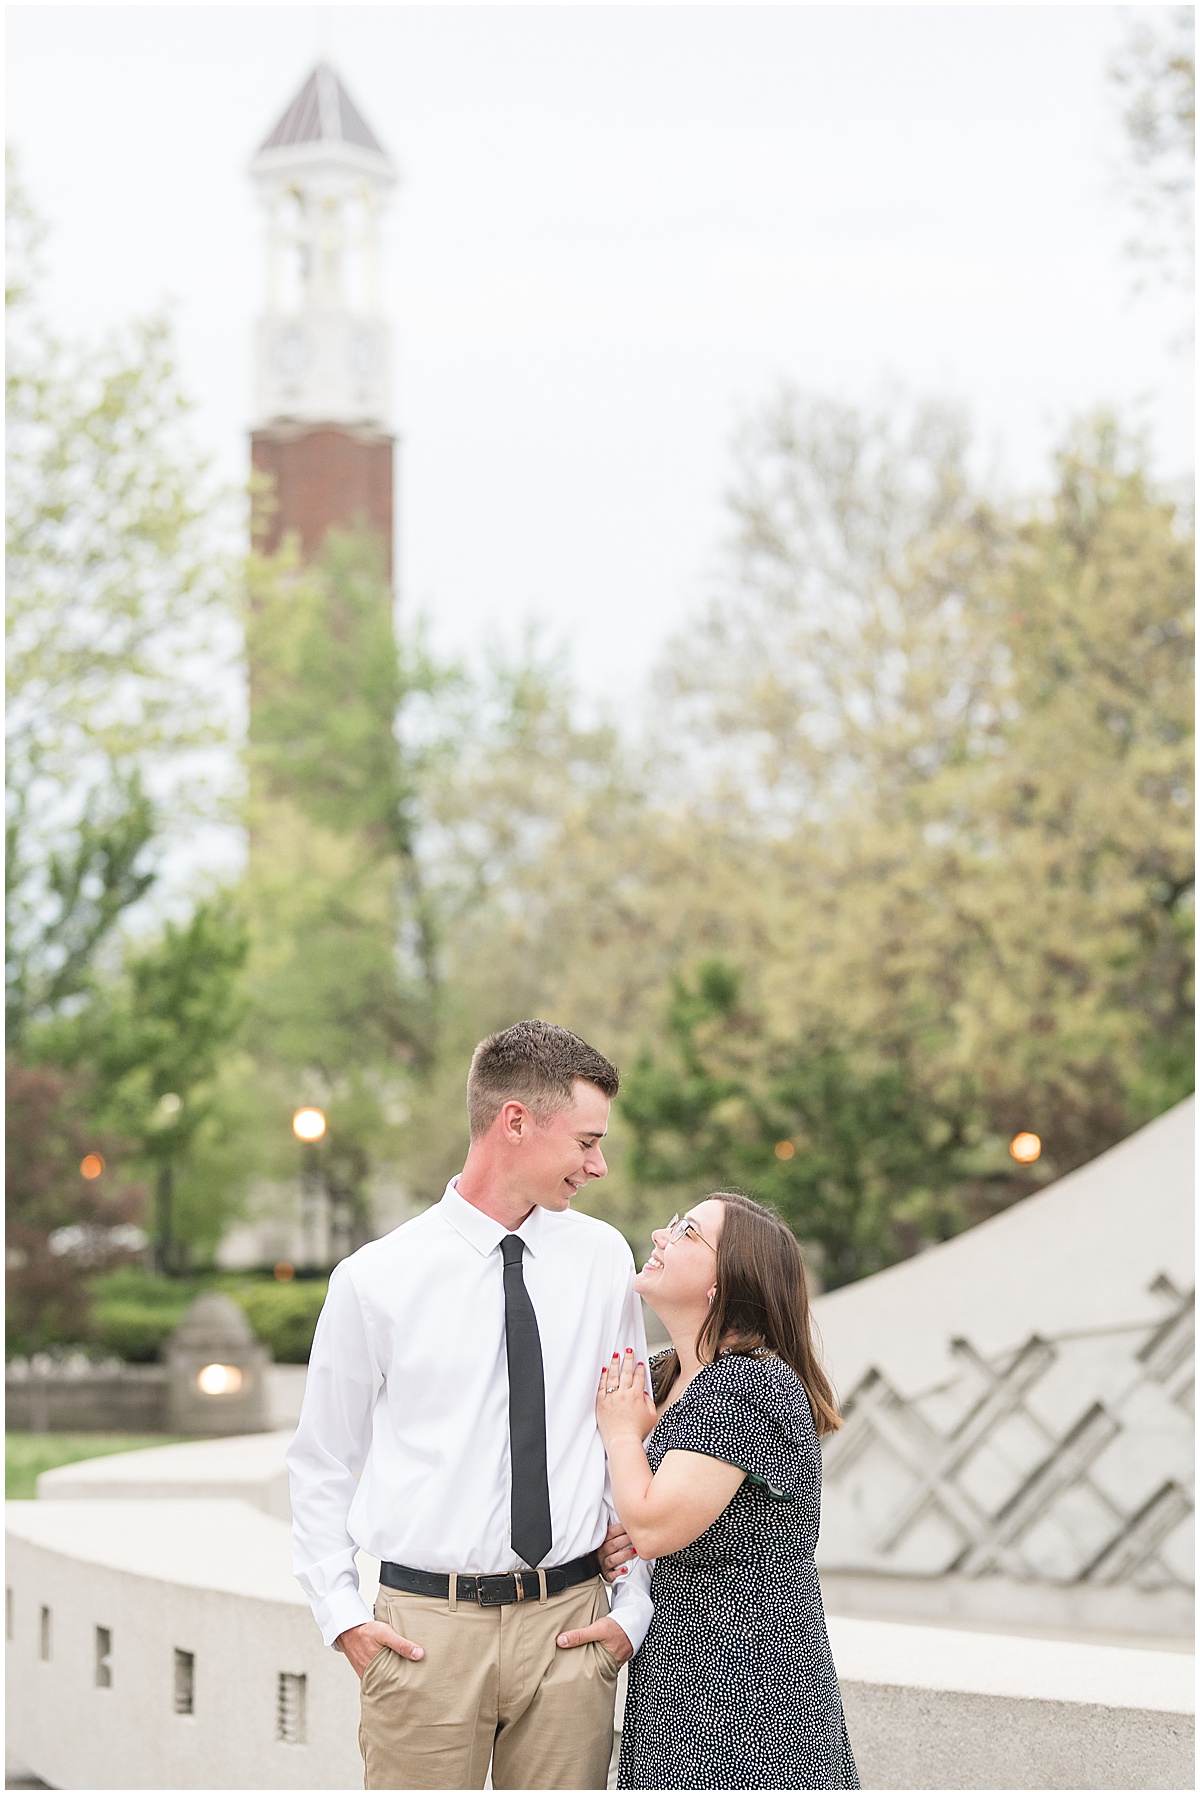 Couple admire each other during engagement and graduation photos by Purdue's Belltower